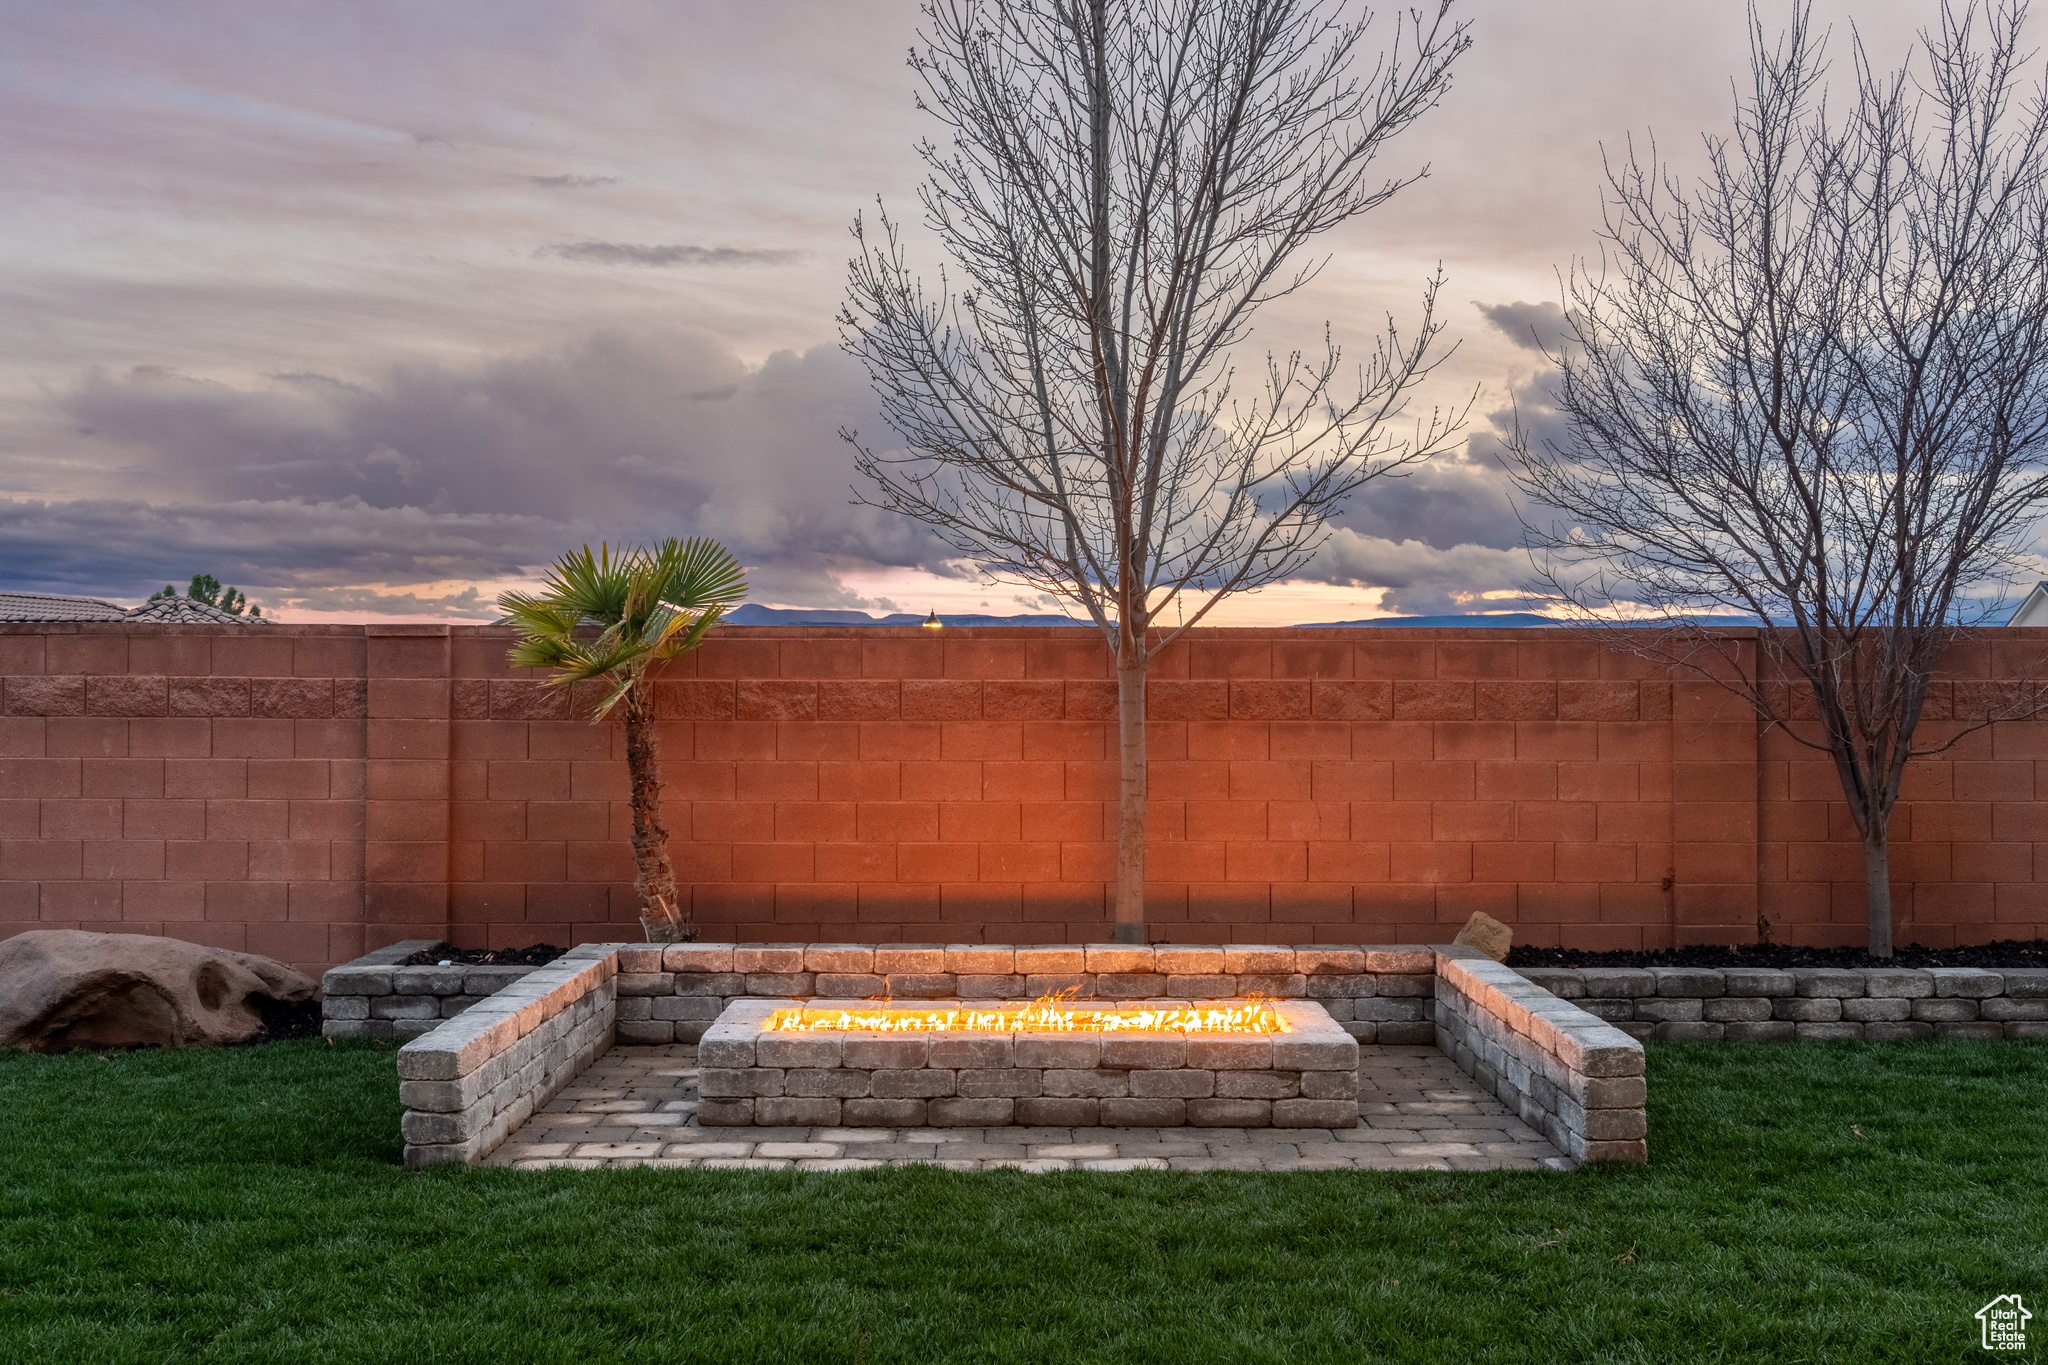 Yard at dusk featuring an outdoor fire pit